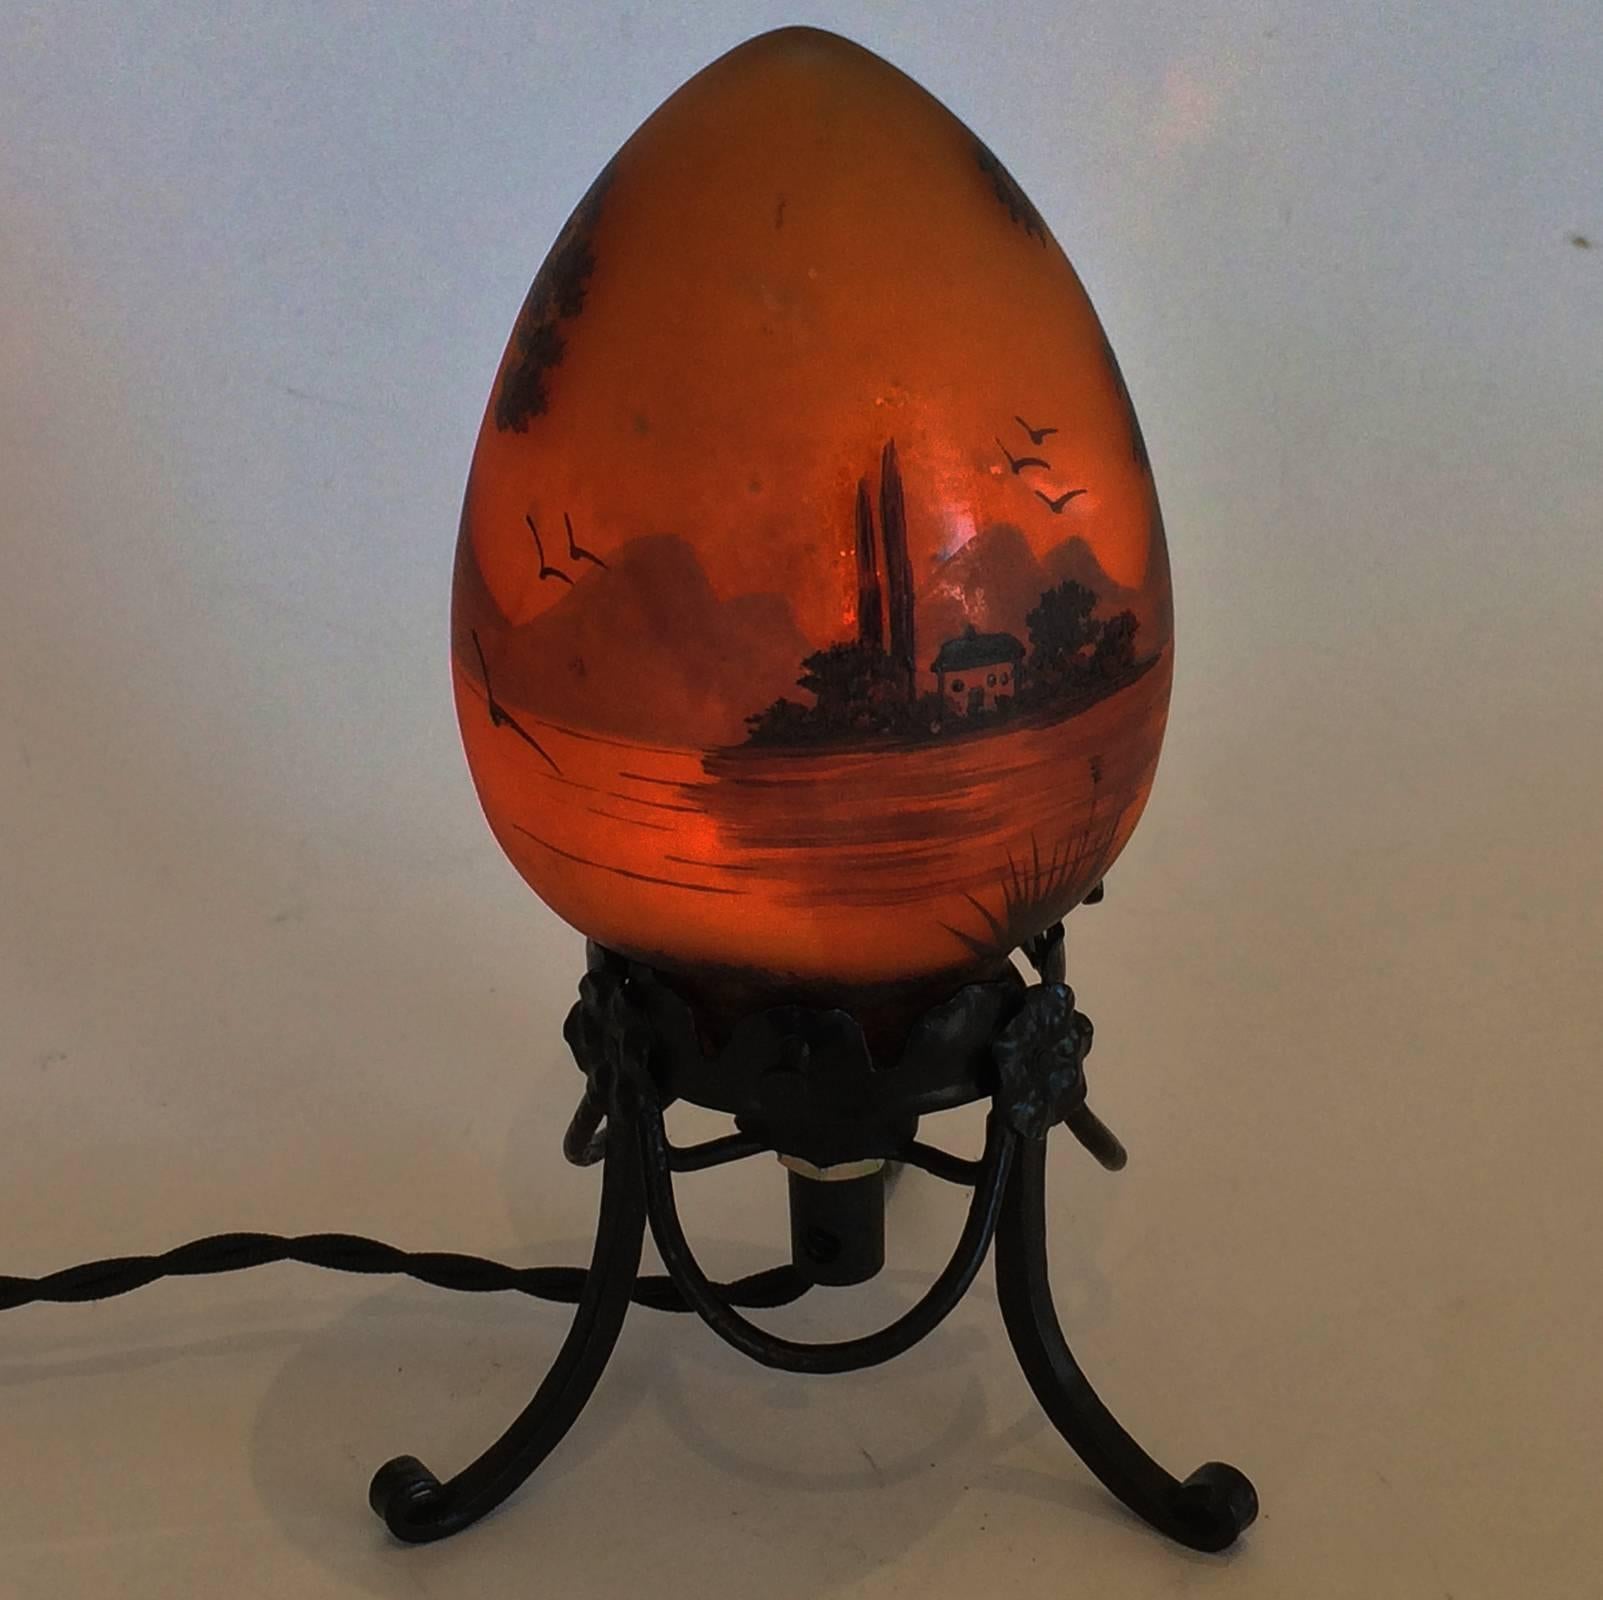 Art Deco French Veilleuse (night light), signed by Jany Peynaud. Truly a magnificent piece of Art in miniature depicting a house beside a lake with trees and birds in flight. Intricate and quality hand-forged iron base, with perfectly shaped, ovoid